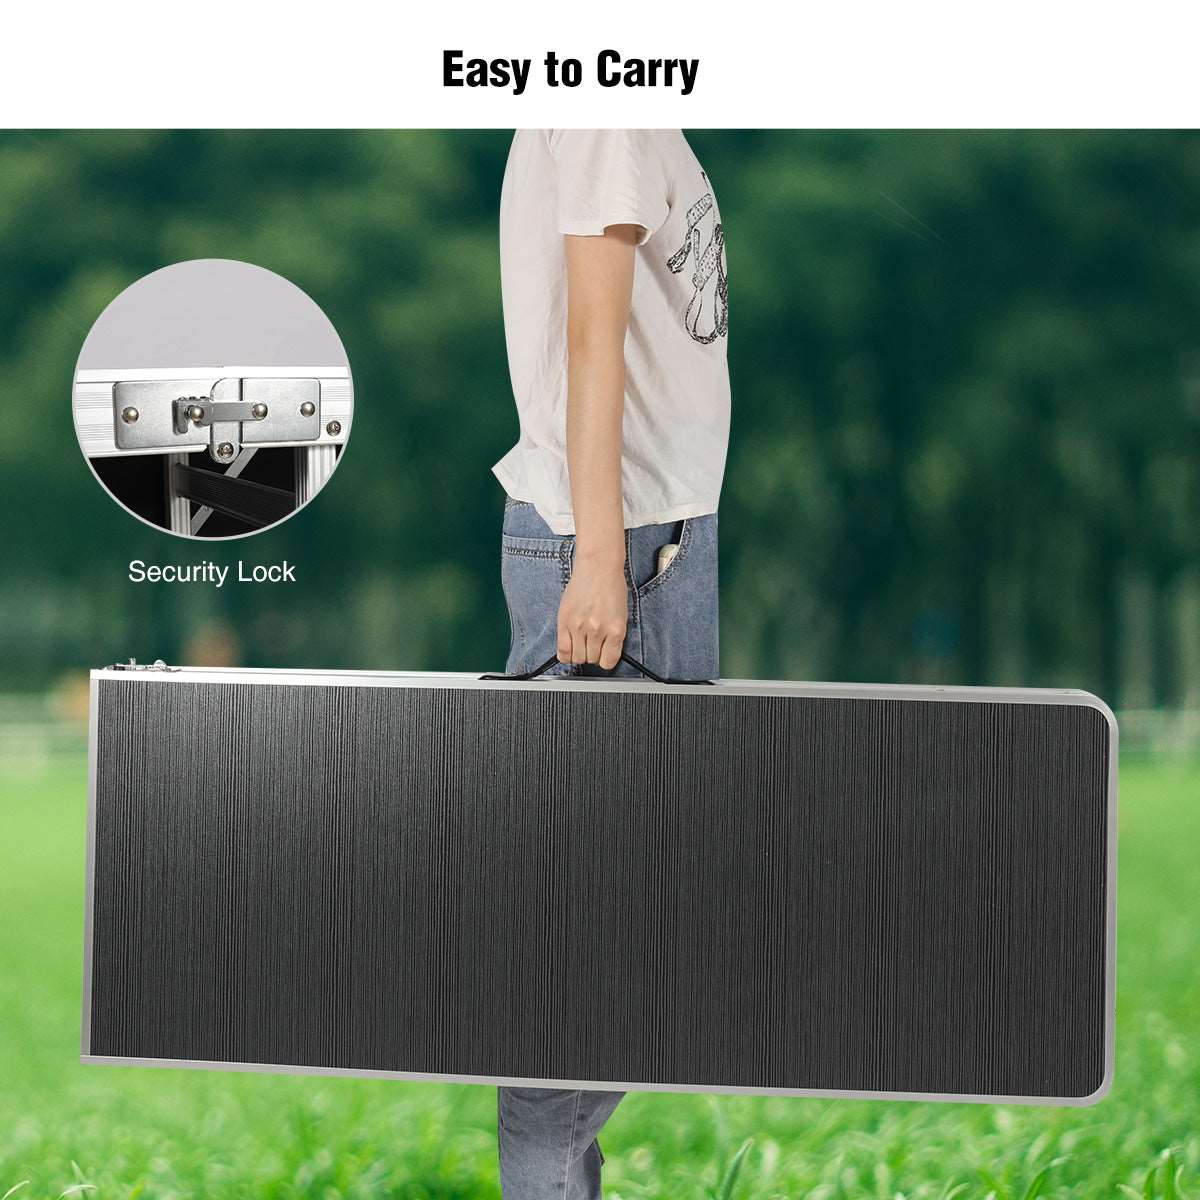 REDCAMP portable bar table easy to carry